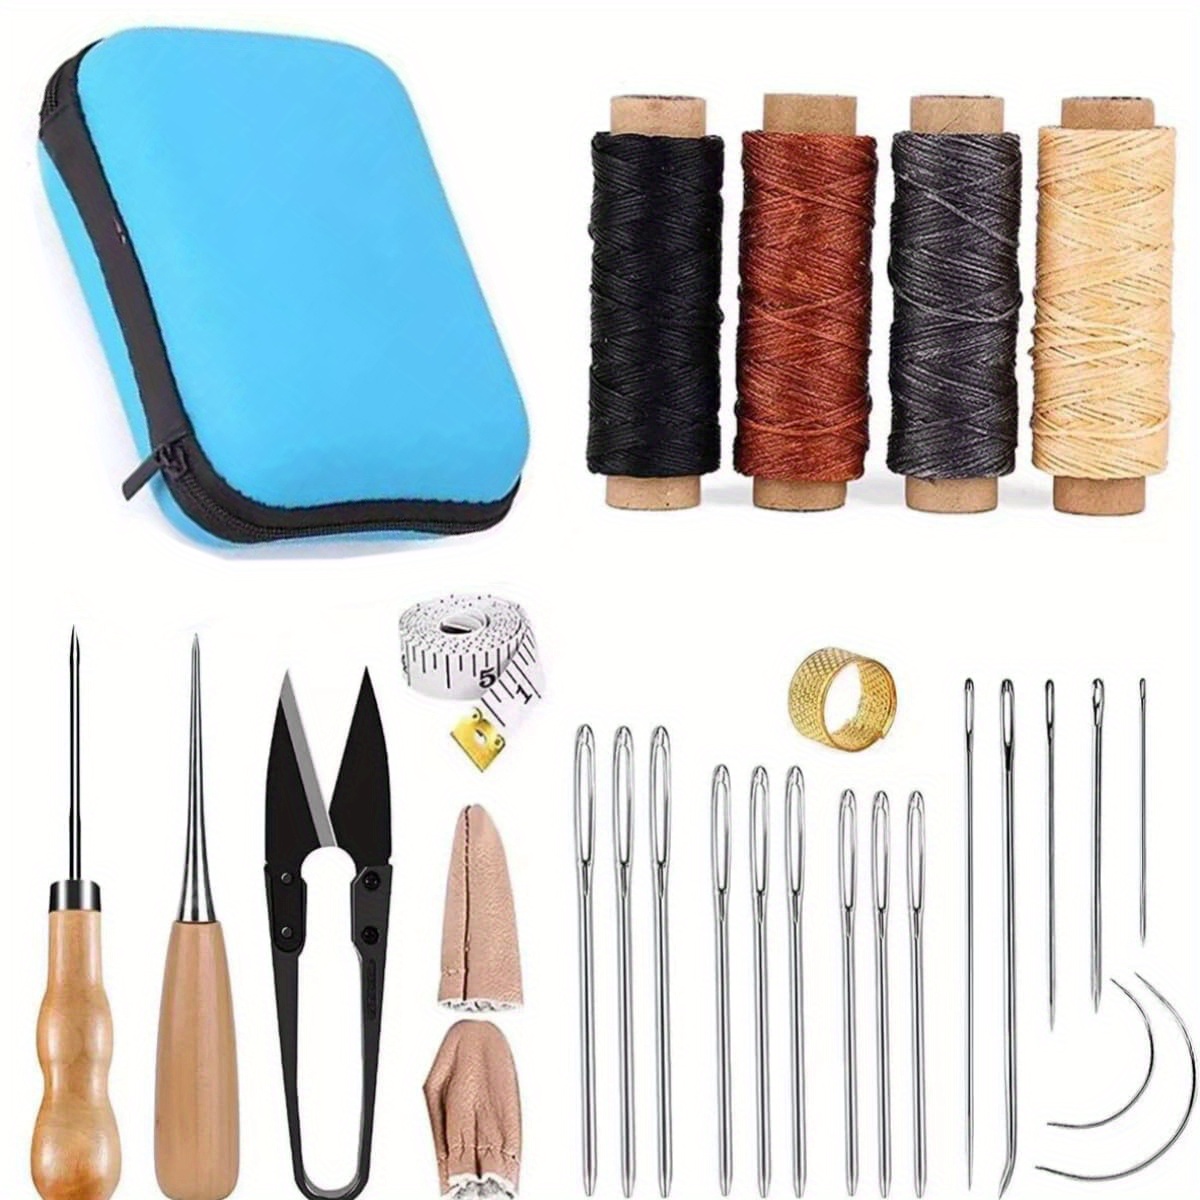 

Leather Sewing Kit, Leather Working Tools And Supplies, Leather Working Kit With Large-eye Stitching Needles, Waxed Thread, Leather Upholstery Repair Kit, Leather Sewing Tools For Diy Leather Craft